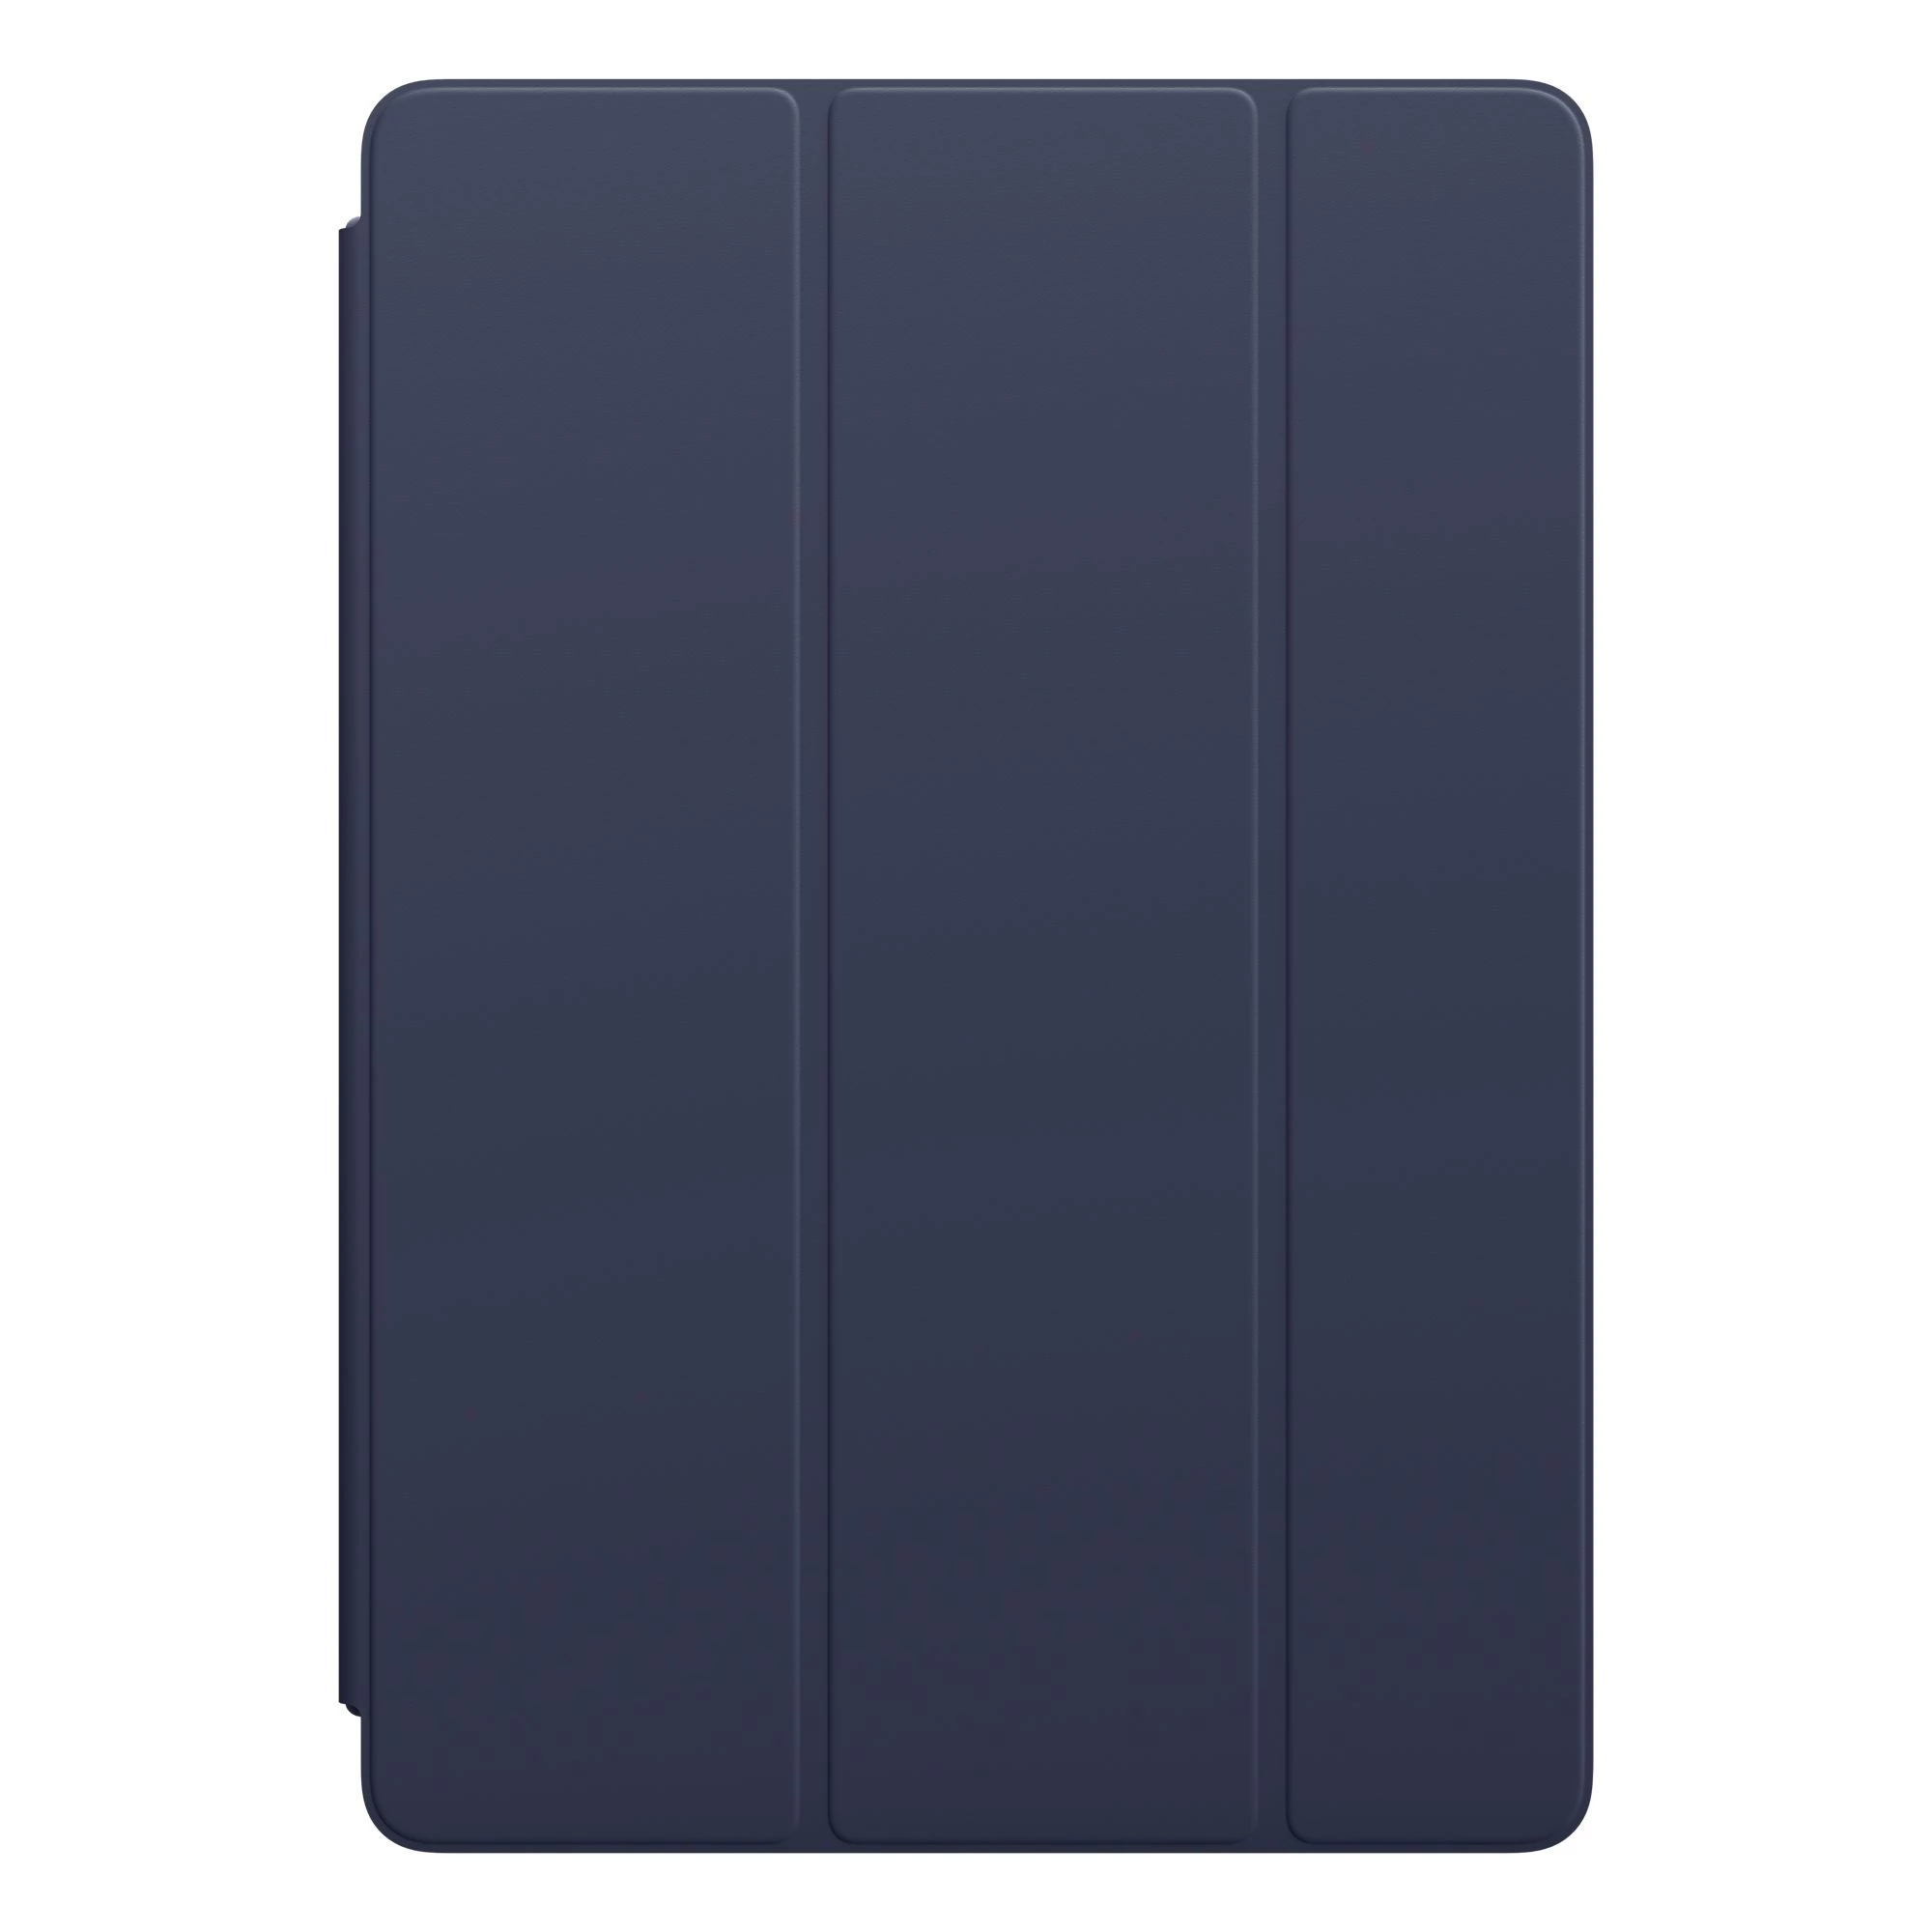 Apple Smart Cover for iPad 10.2"/Air 3/Pro 10.5" - Midnight Blue (MQ092)